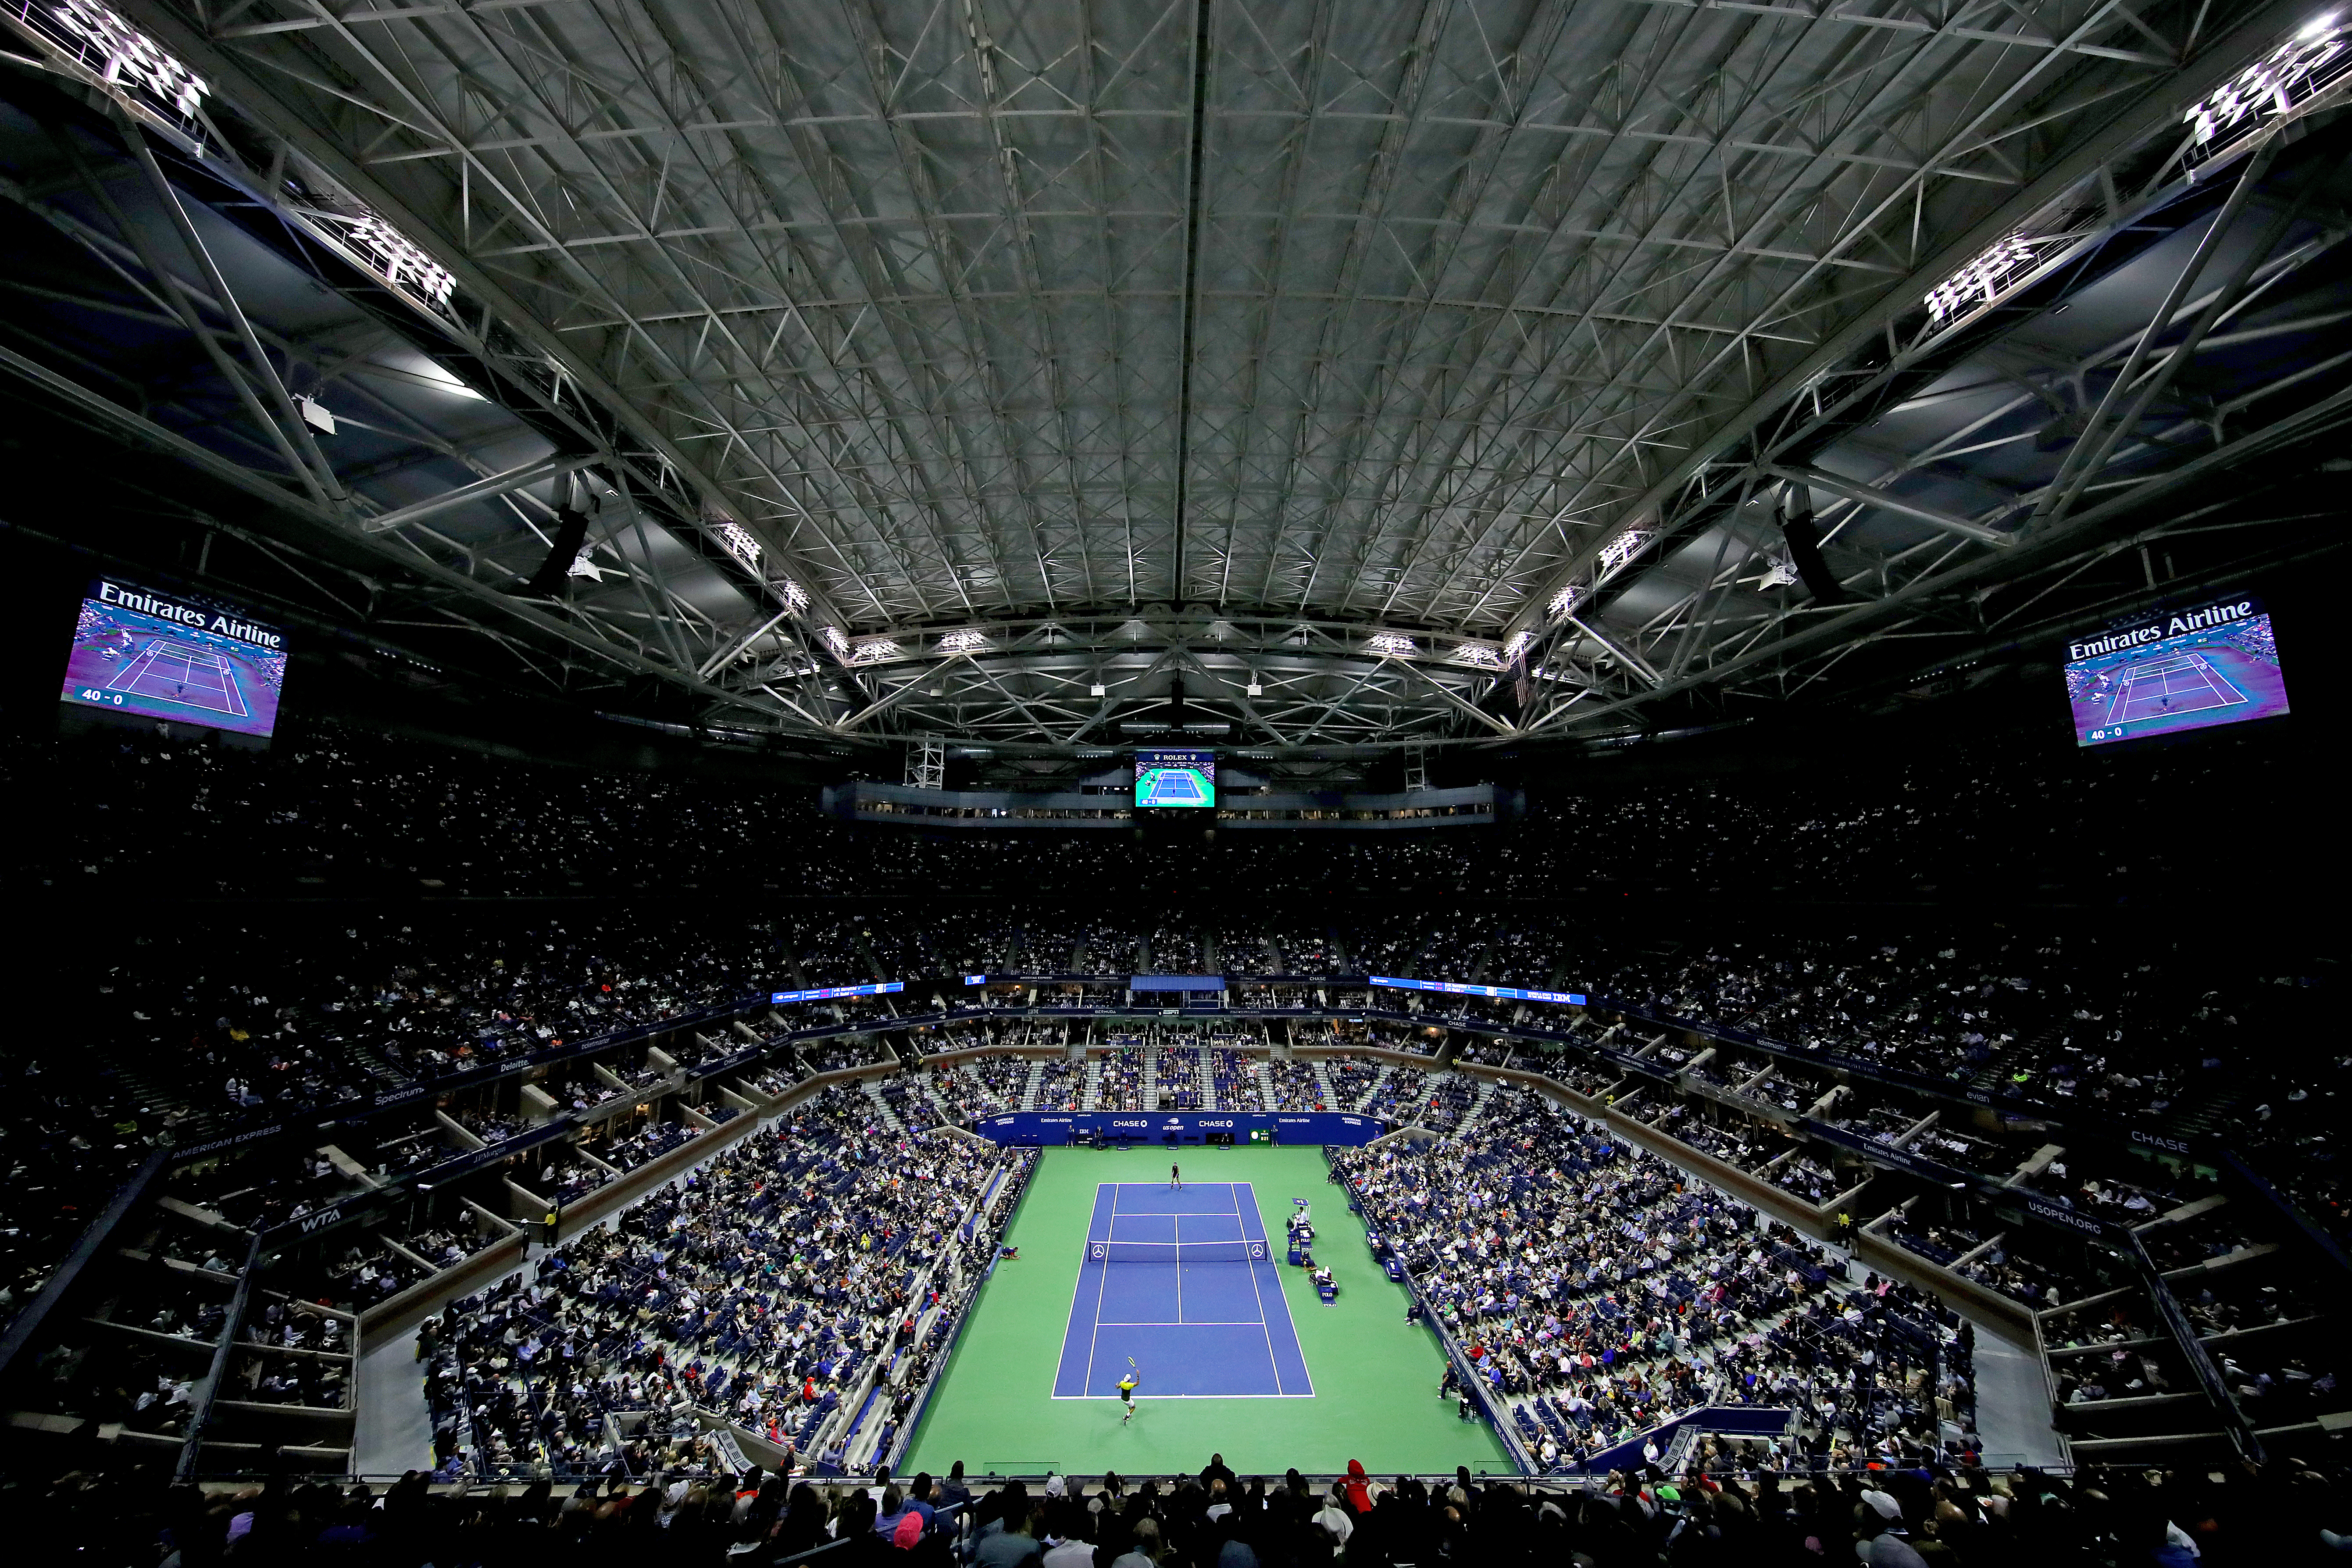 US Open changing hard-court brand for first time since 1970s - Tennis.com